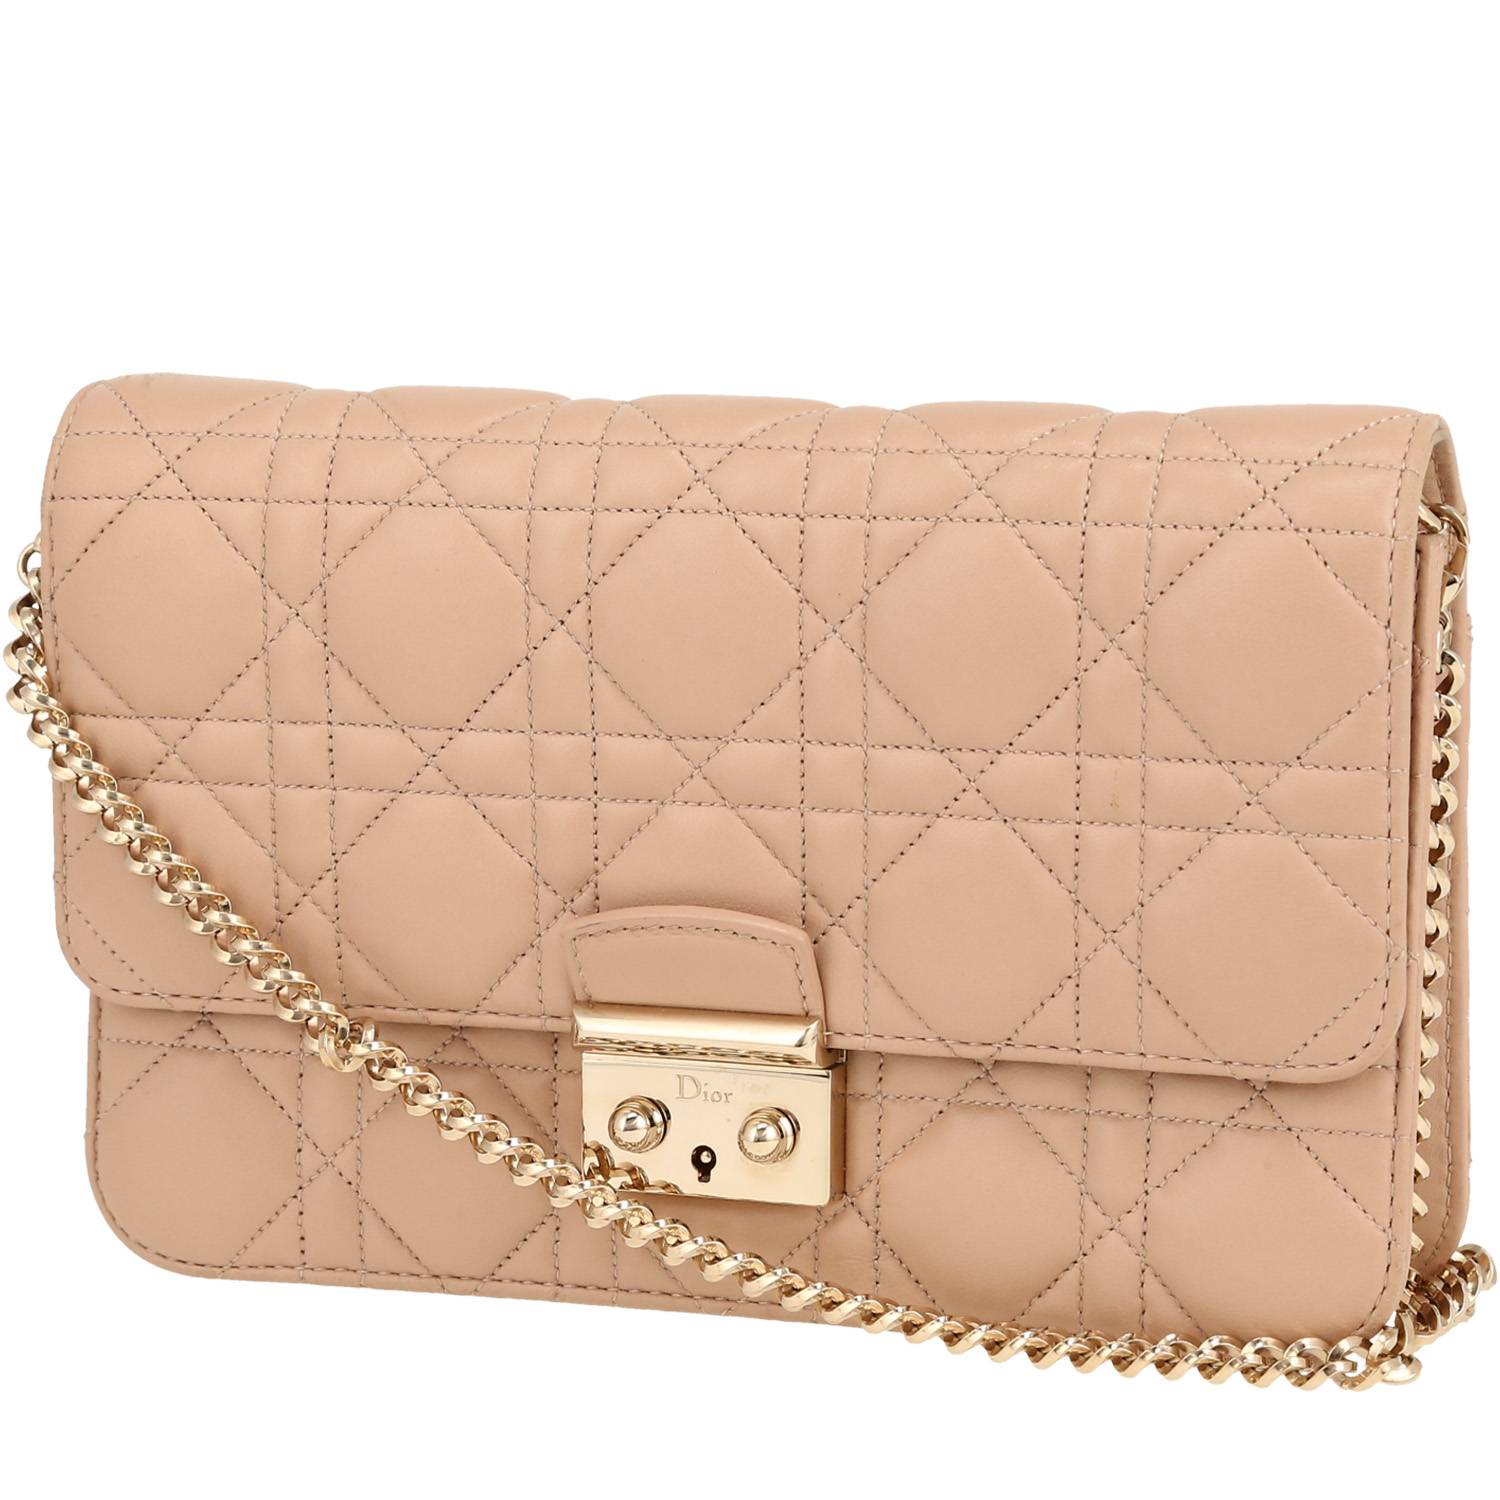 Promenade Handbag In Pink Leather Cannage